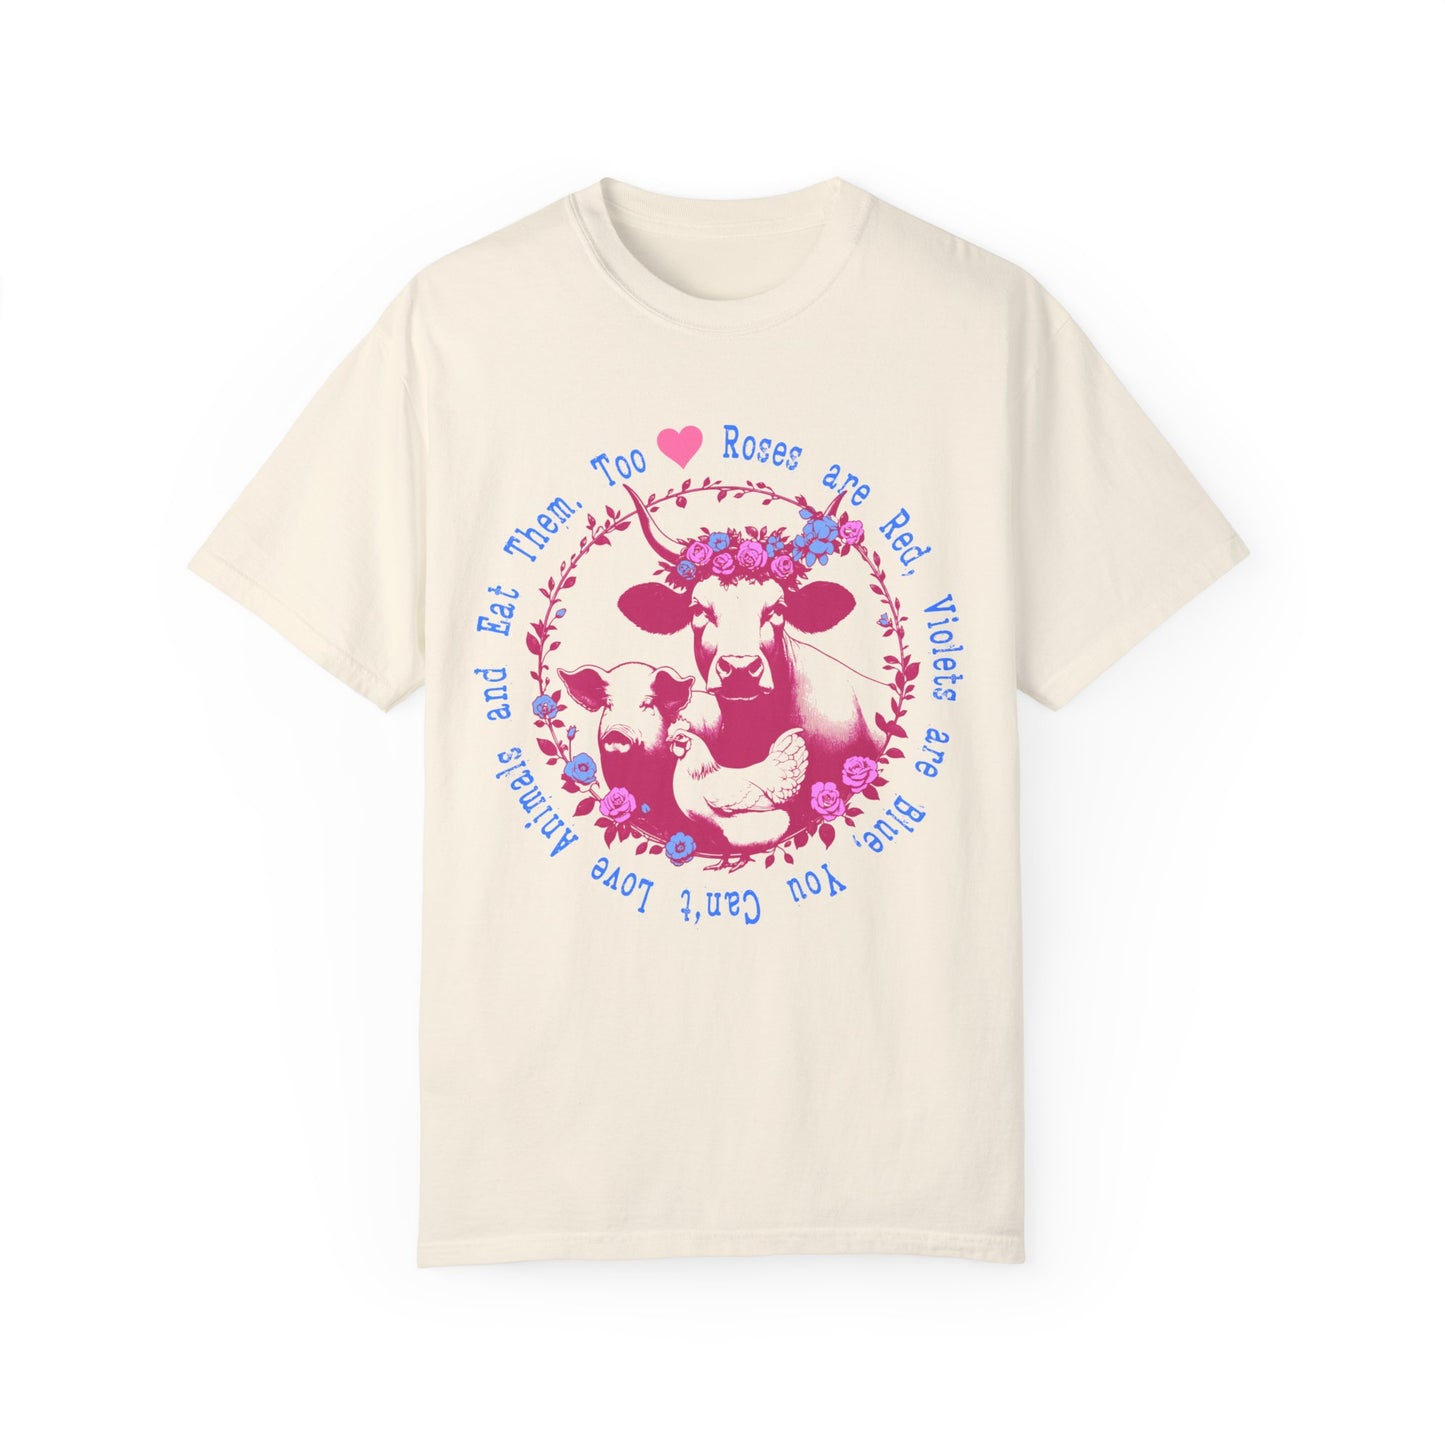 Roses are Red Vegan T-shirt in Bright Colors {Unisex}